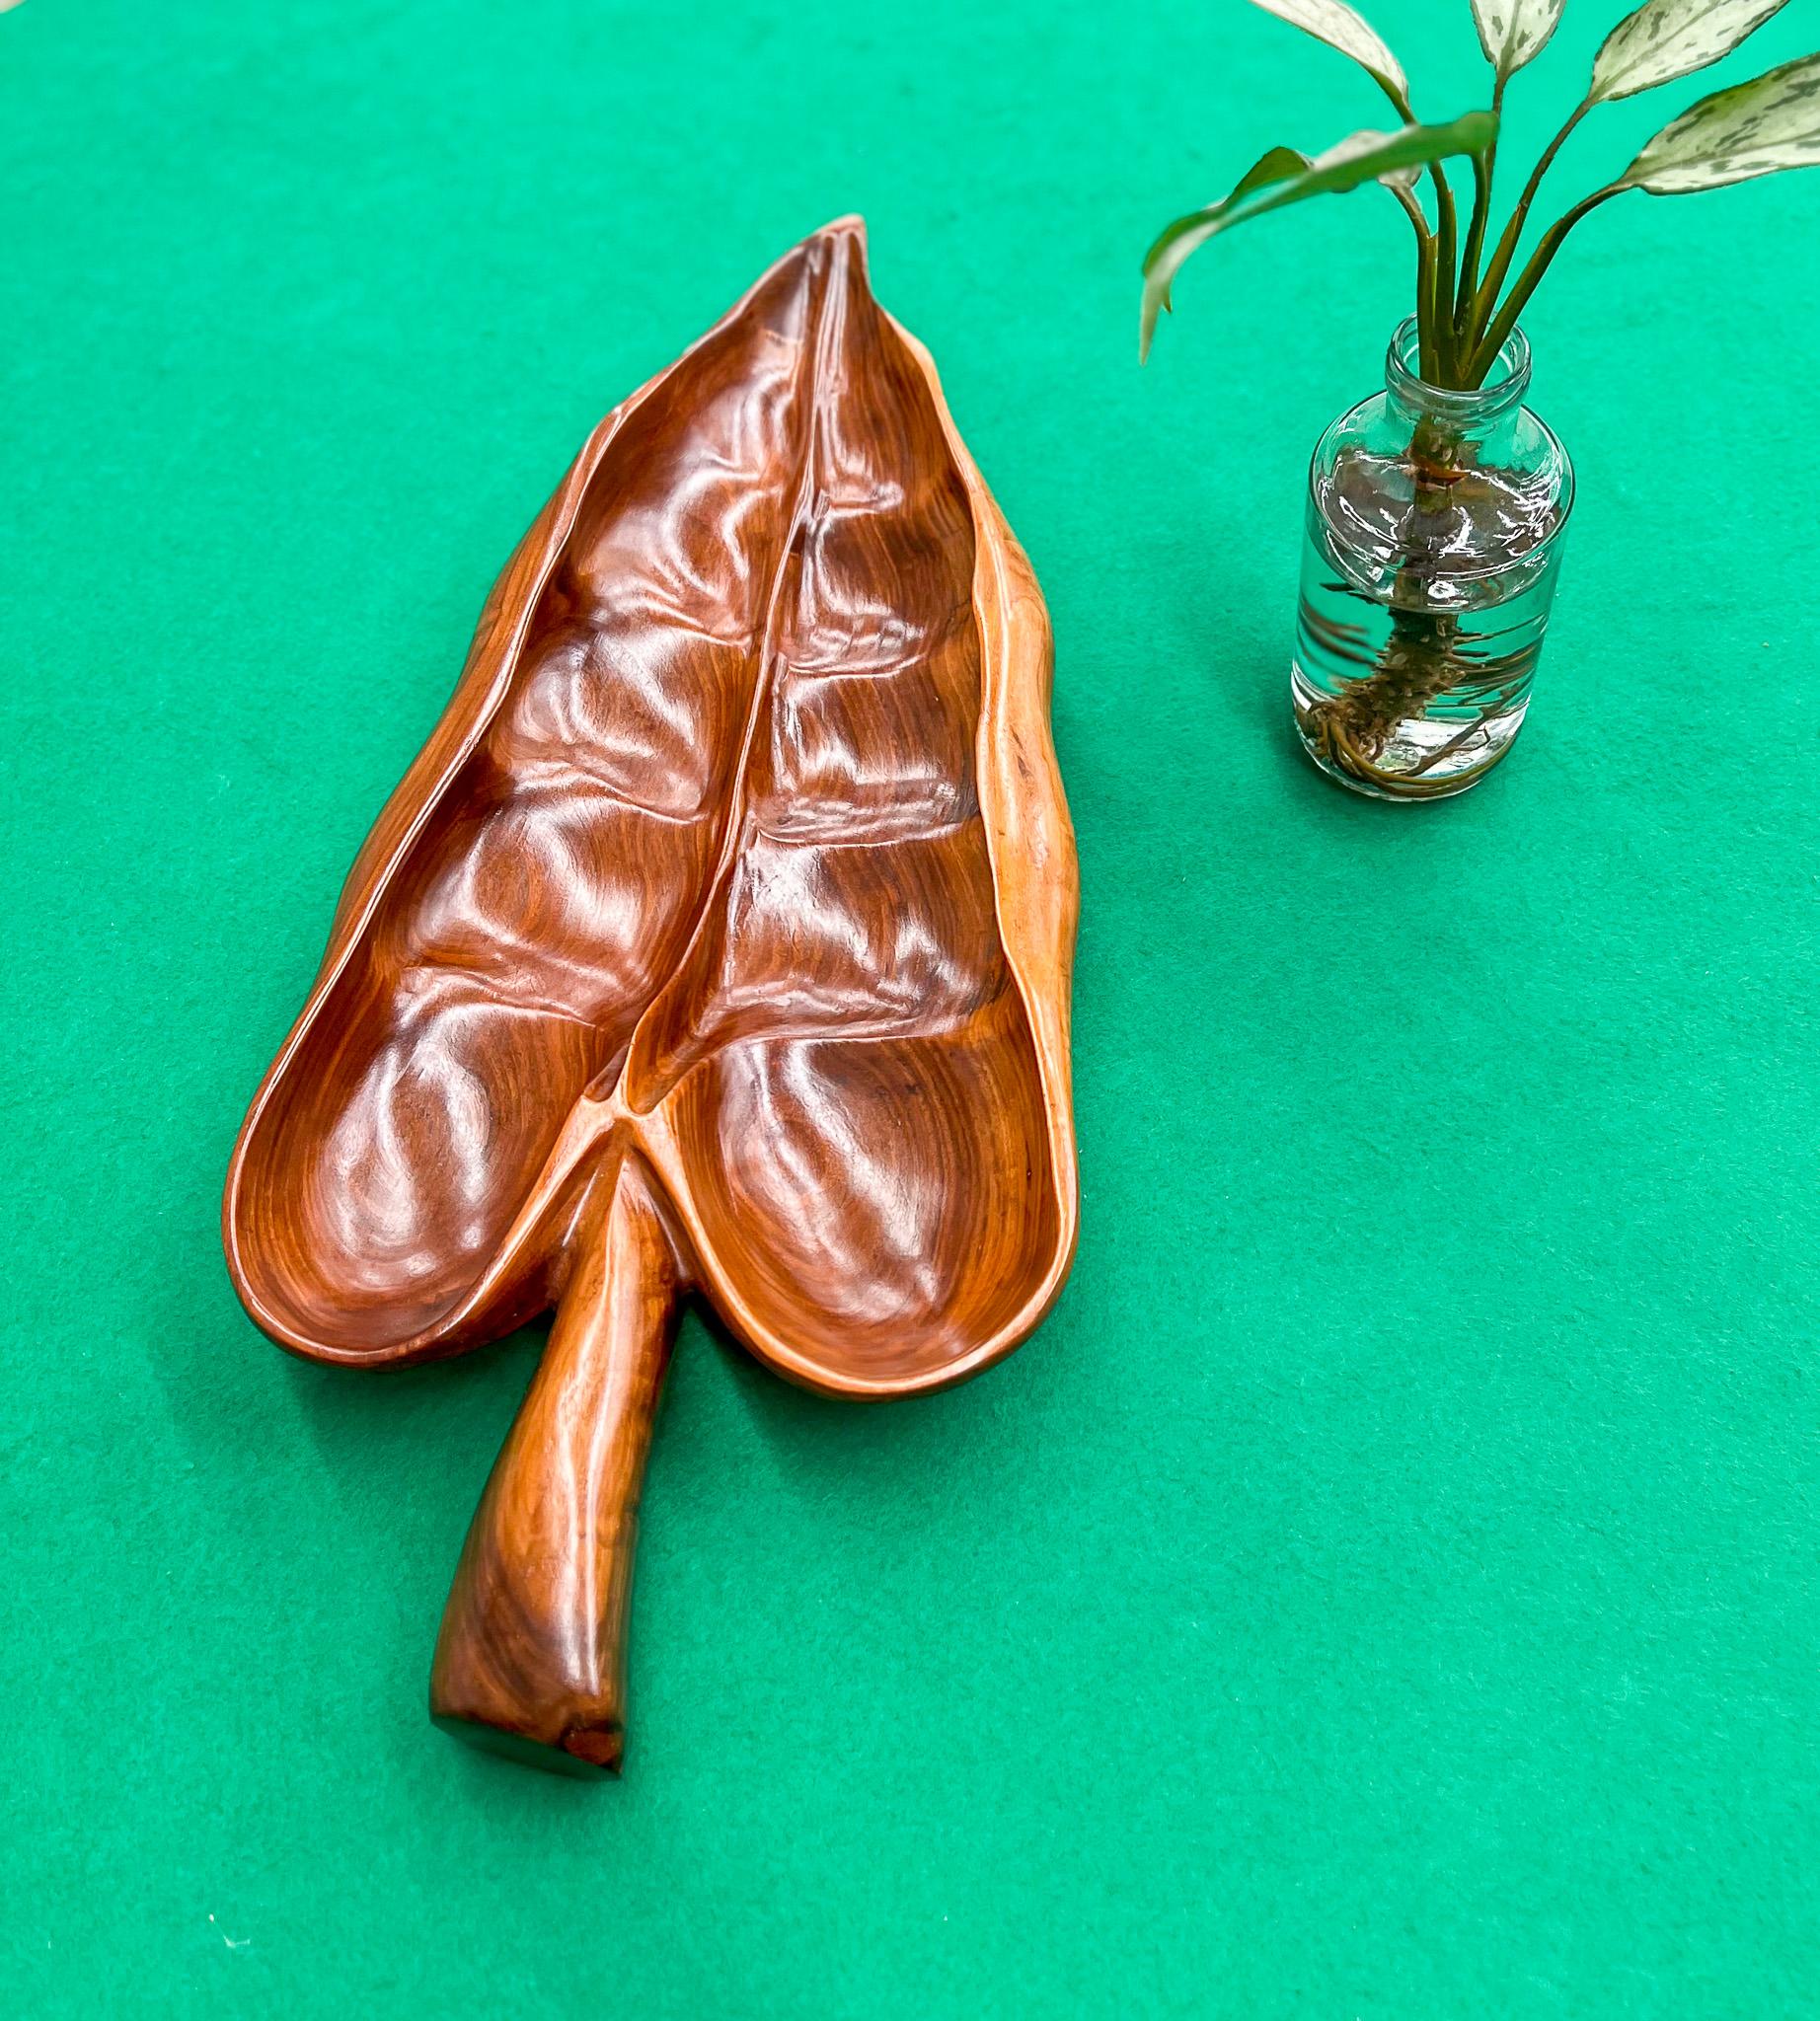 Available today, this Midcentury Brazilian Modern Decorative Platter with Leaf-Shape was made in Brazil during the sixties. Handcrafted from noble wood, the serving platter features smooth curves and delicate woodwork emulating a tropical leaf from